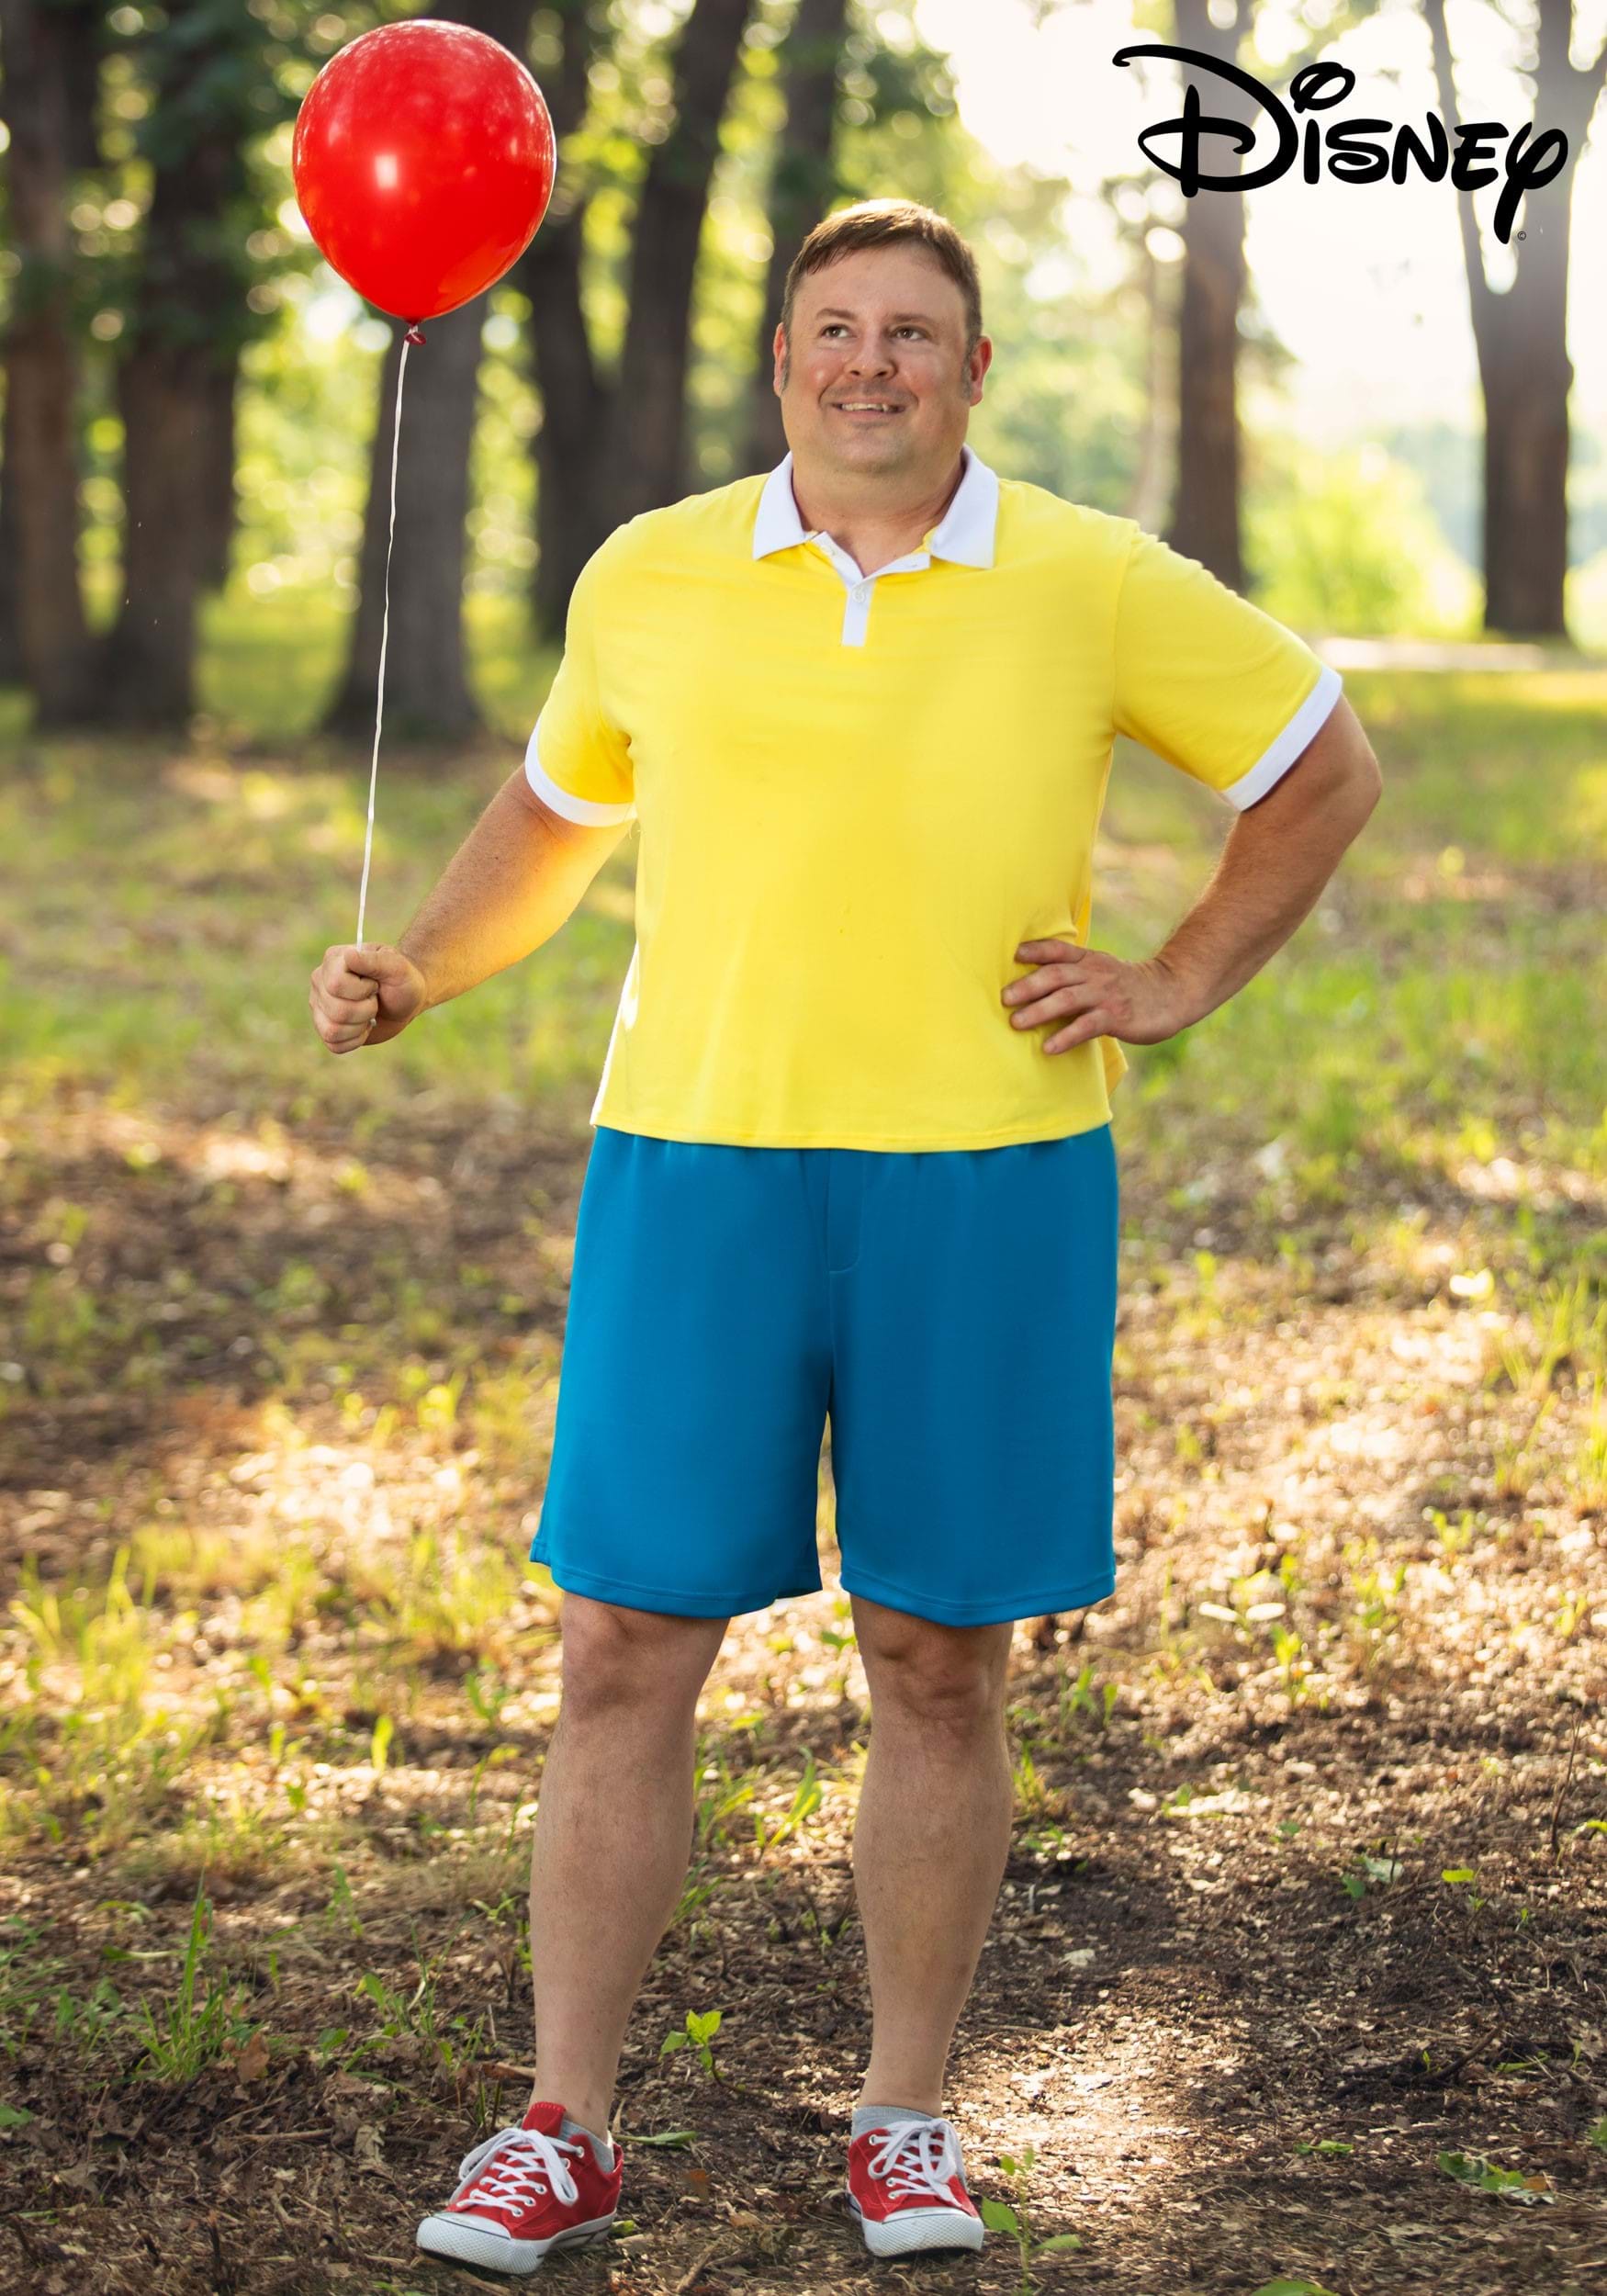 https://images.halloweencostumes.ca/products/83427/1-1/plus-size-disney-christopher-robin-costume.jpg